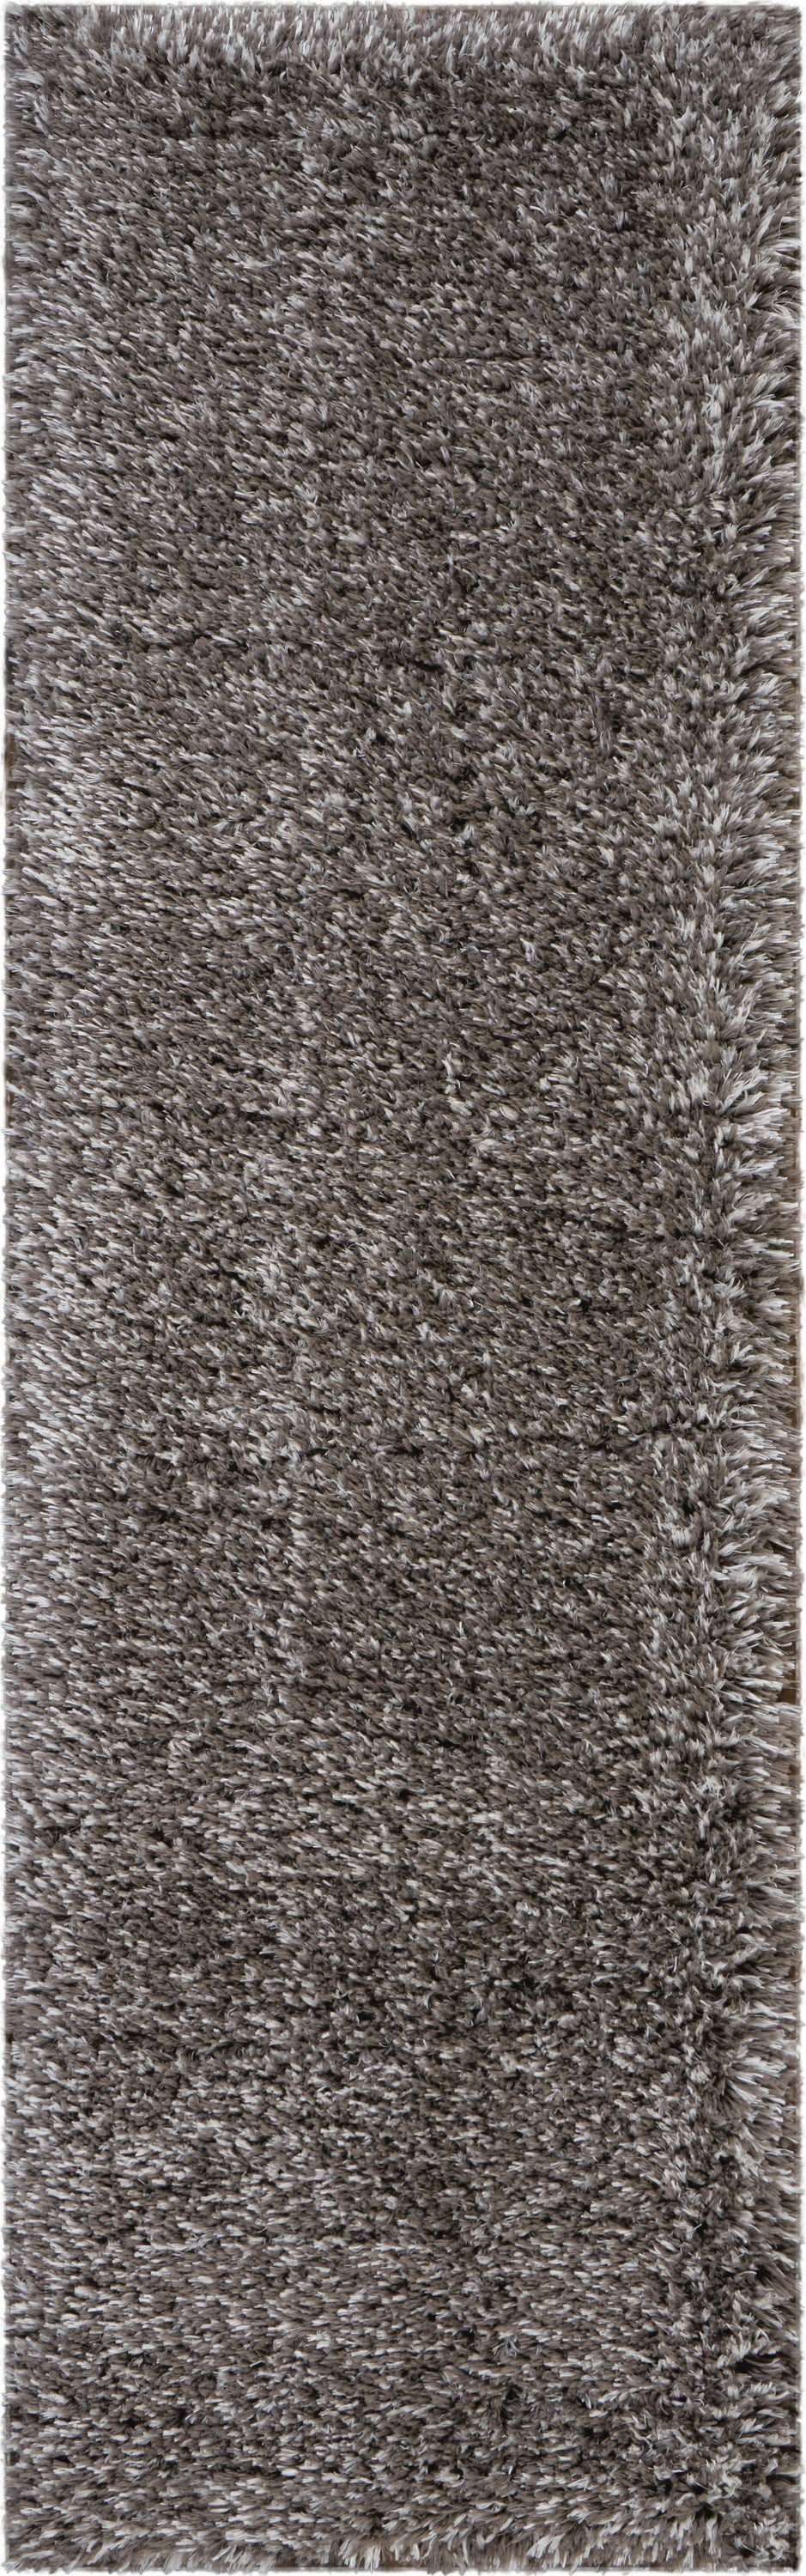 Nourison Luxe Shag LXS01 Charcoal Grey 8' Runner Hallway Rug LXS01 Charcoal